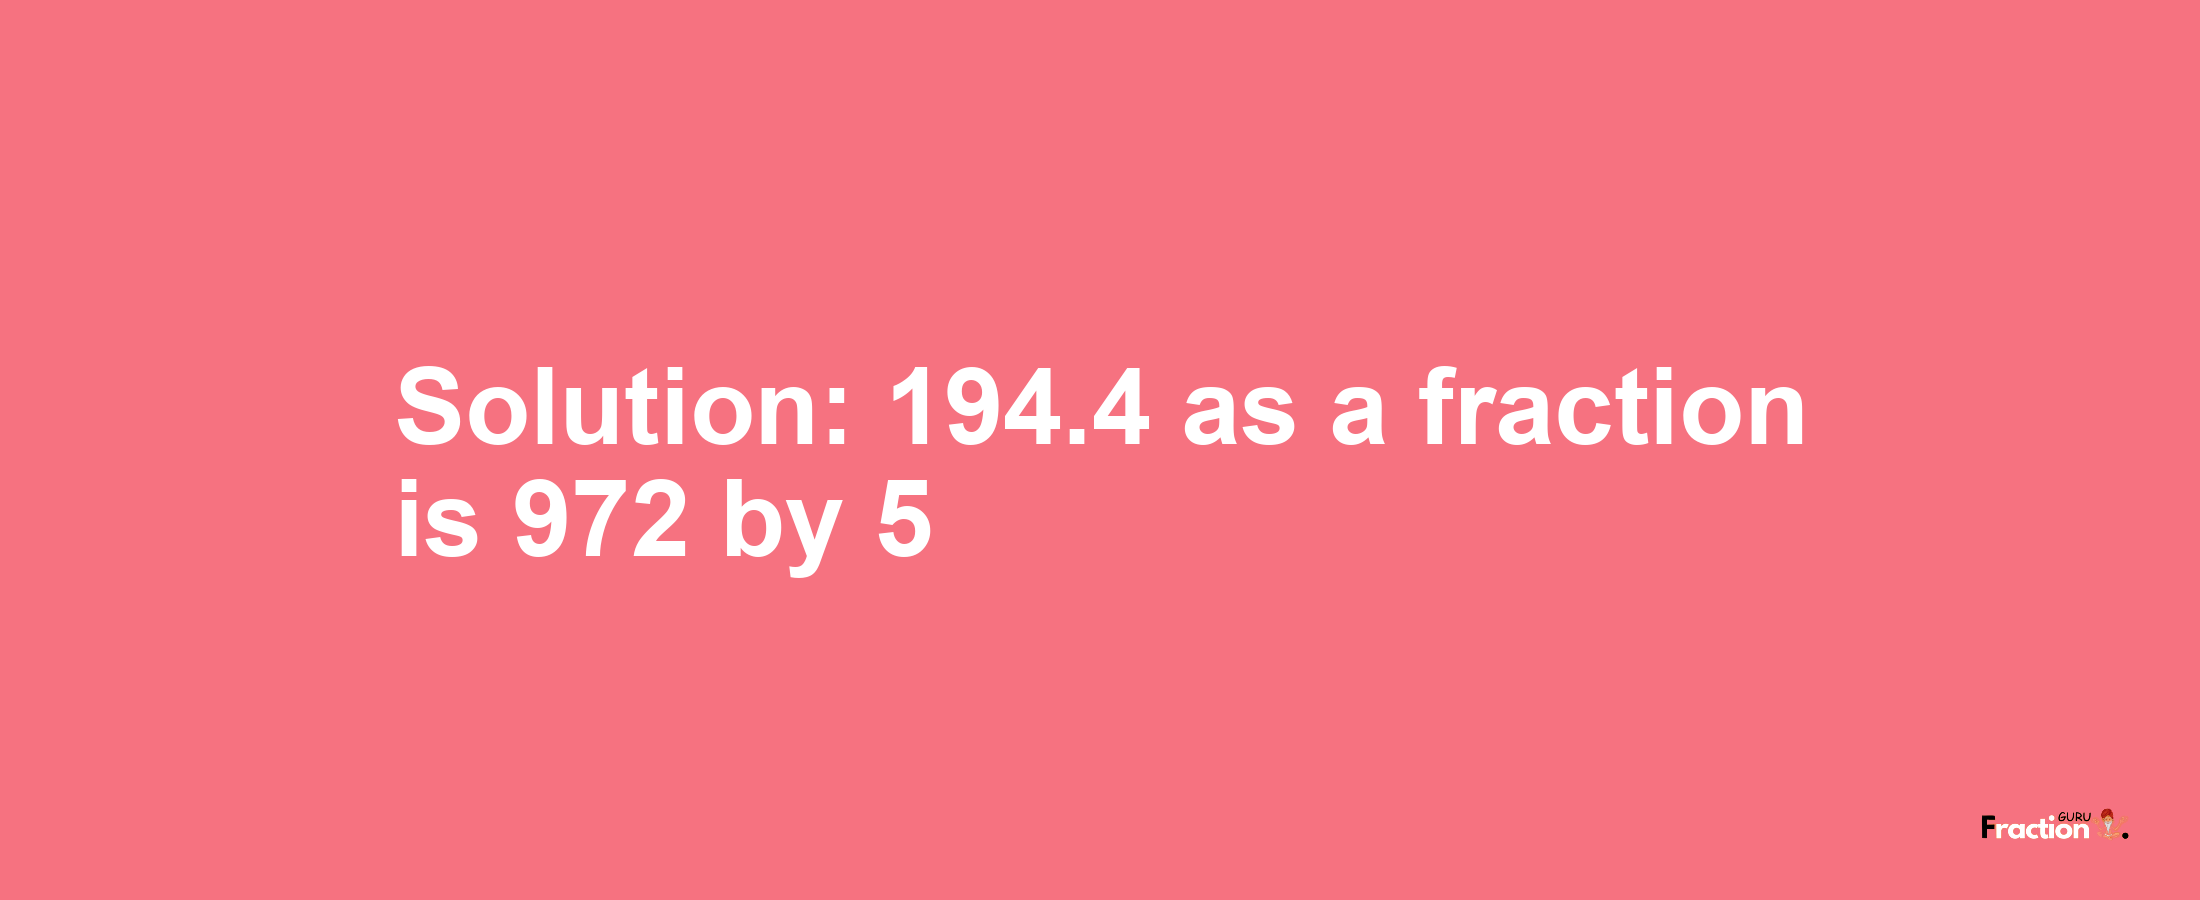 Solution:194.4 as a fraction is 972/5